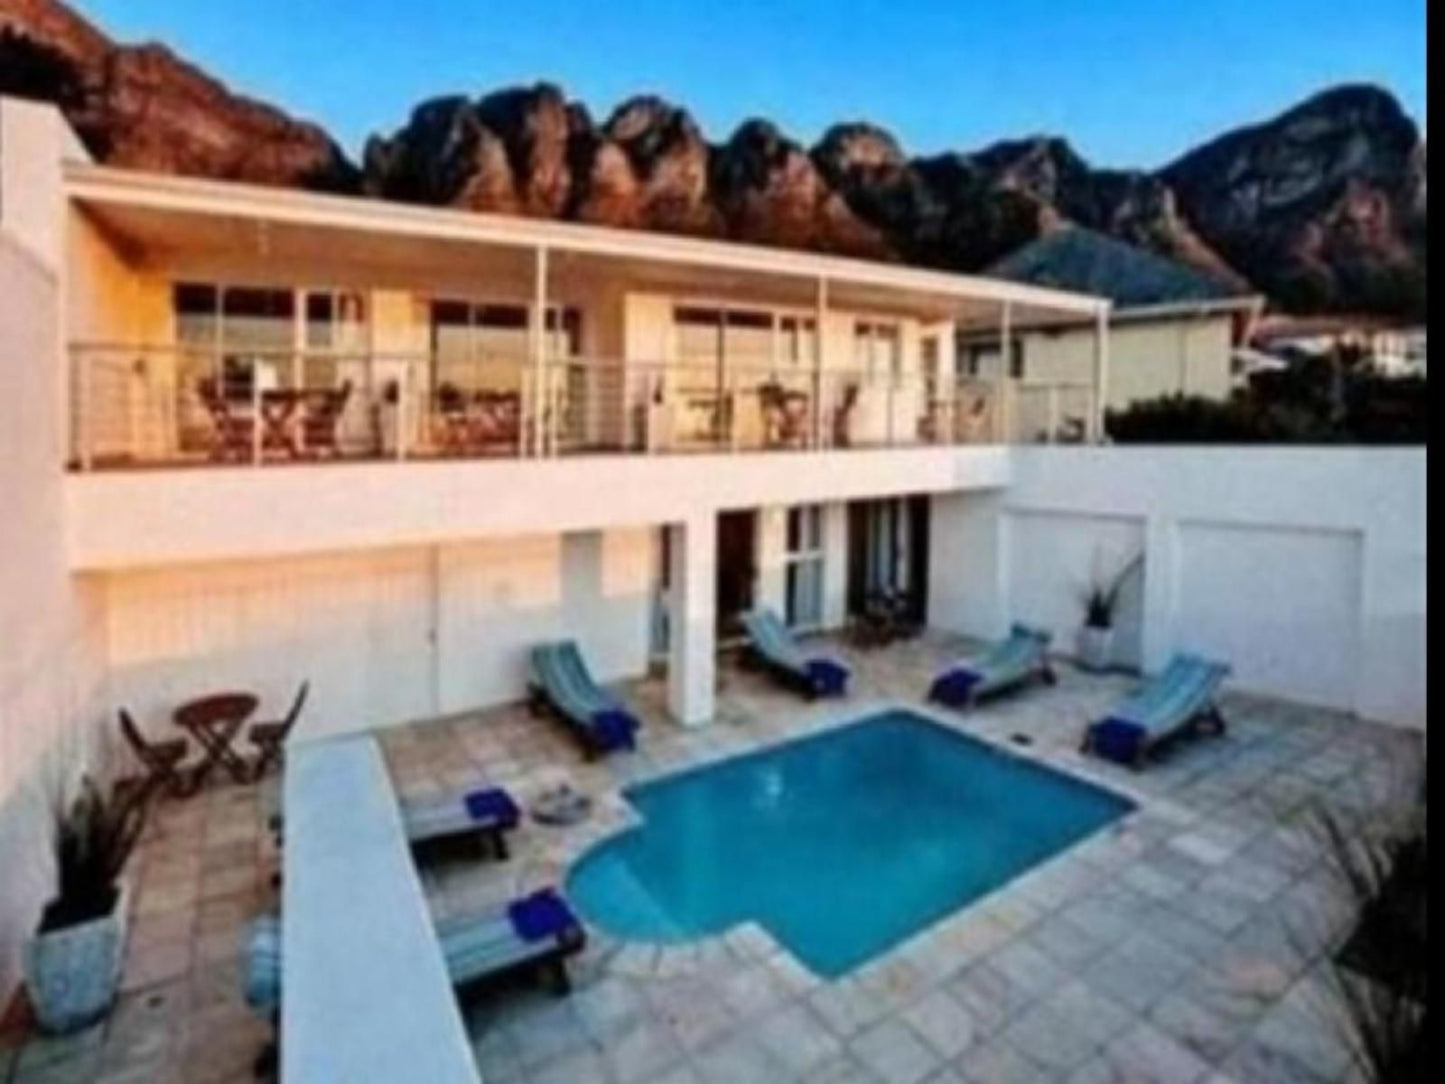 61 On Camps Bay Drive Camps Bay Cape Town Western Cape South Africa Complementary Colors, House, Building, Architecture, Swimming Pool